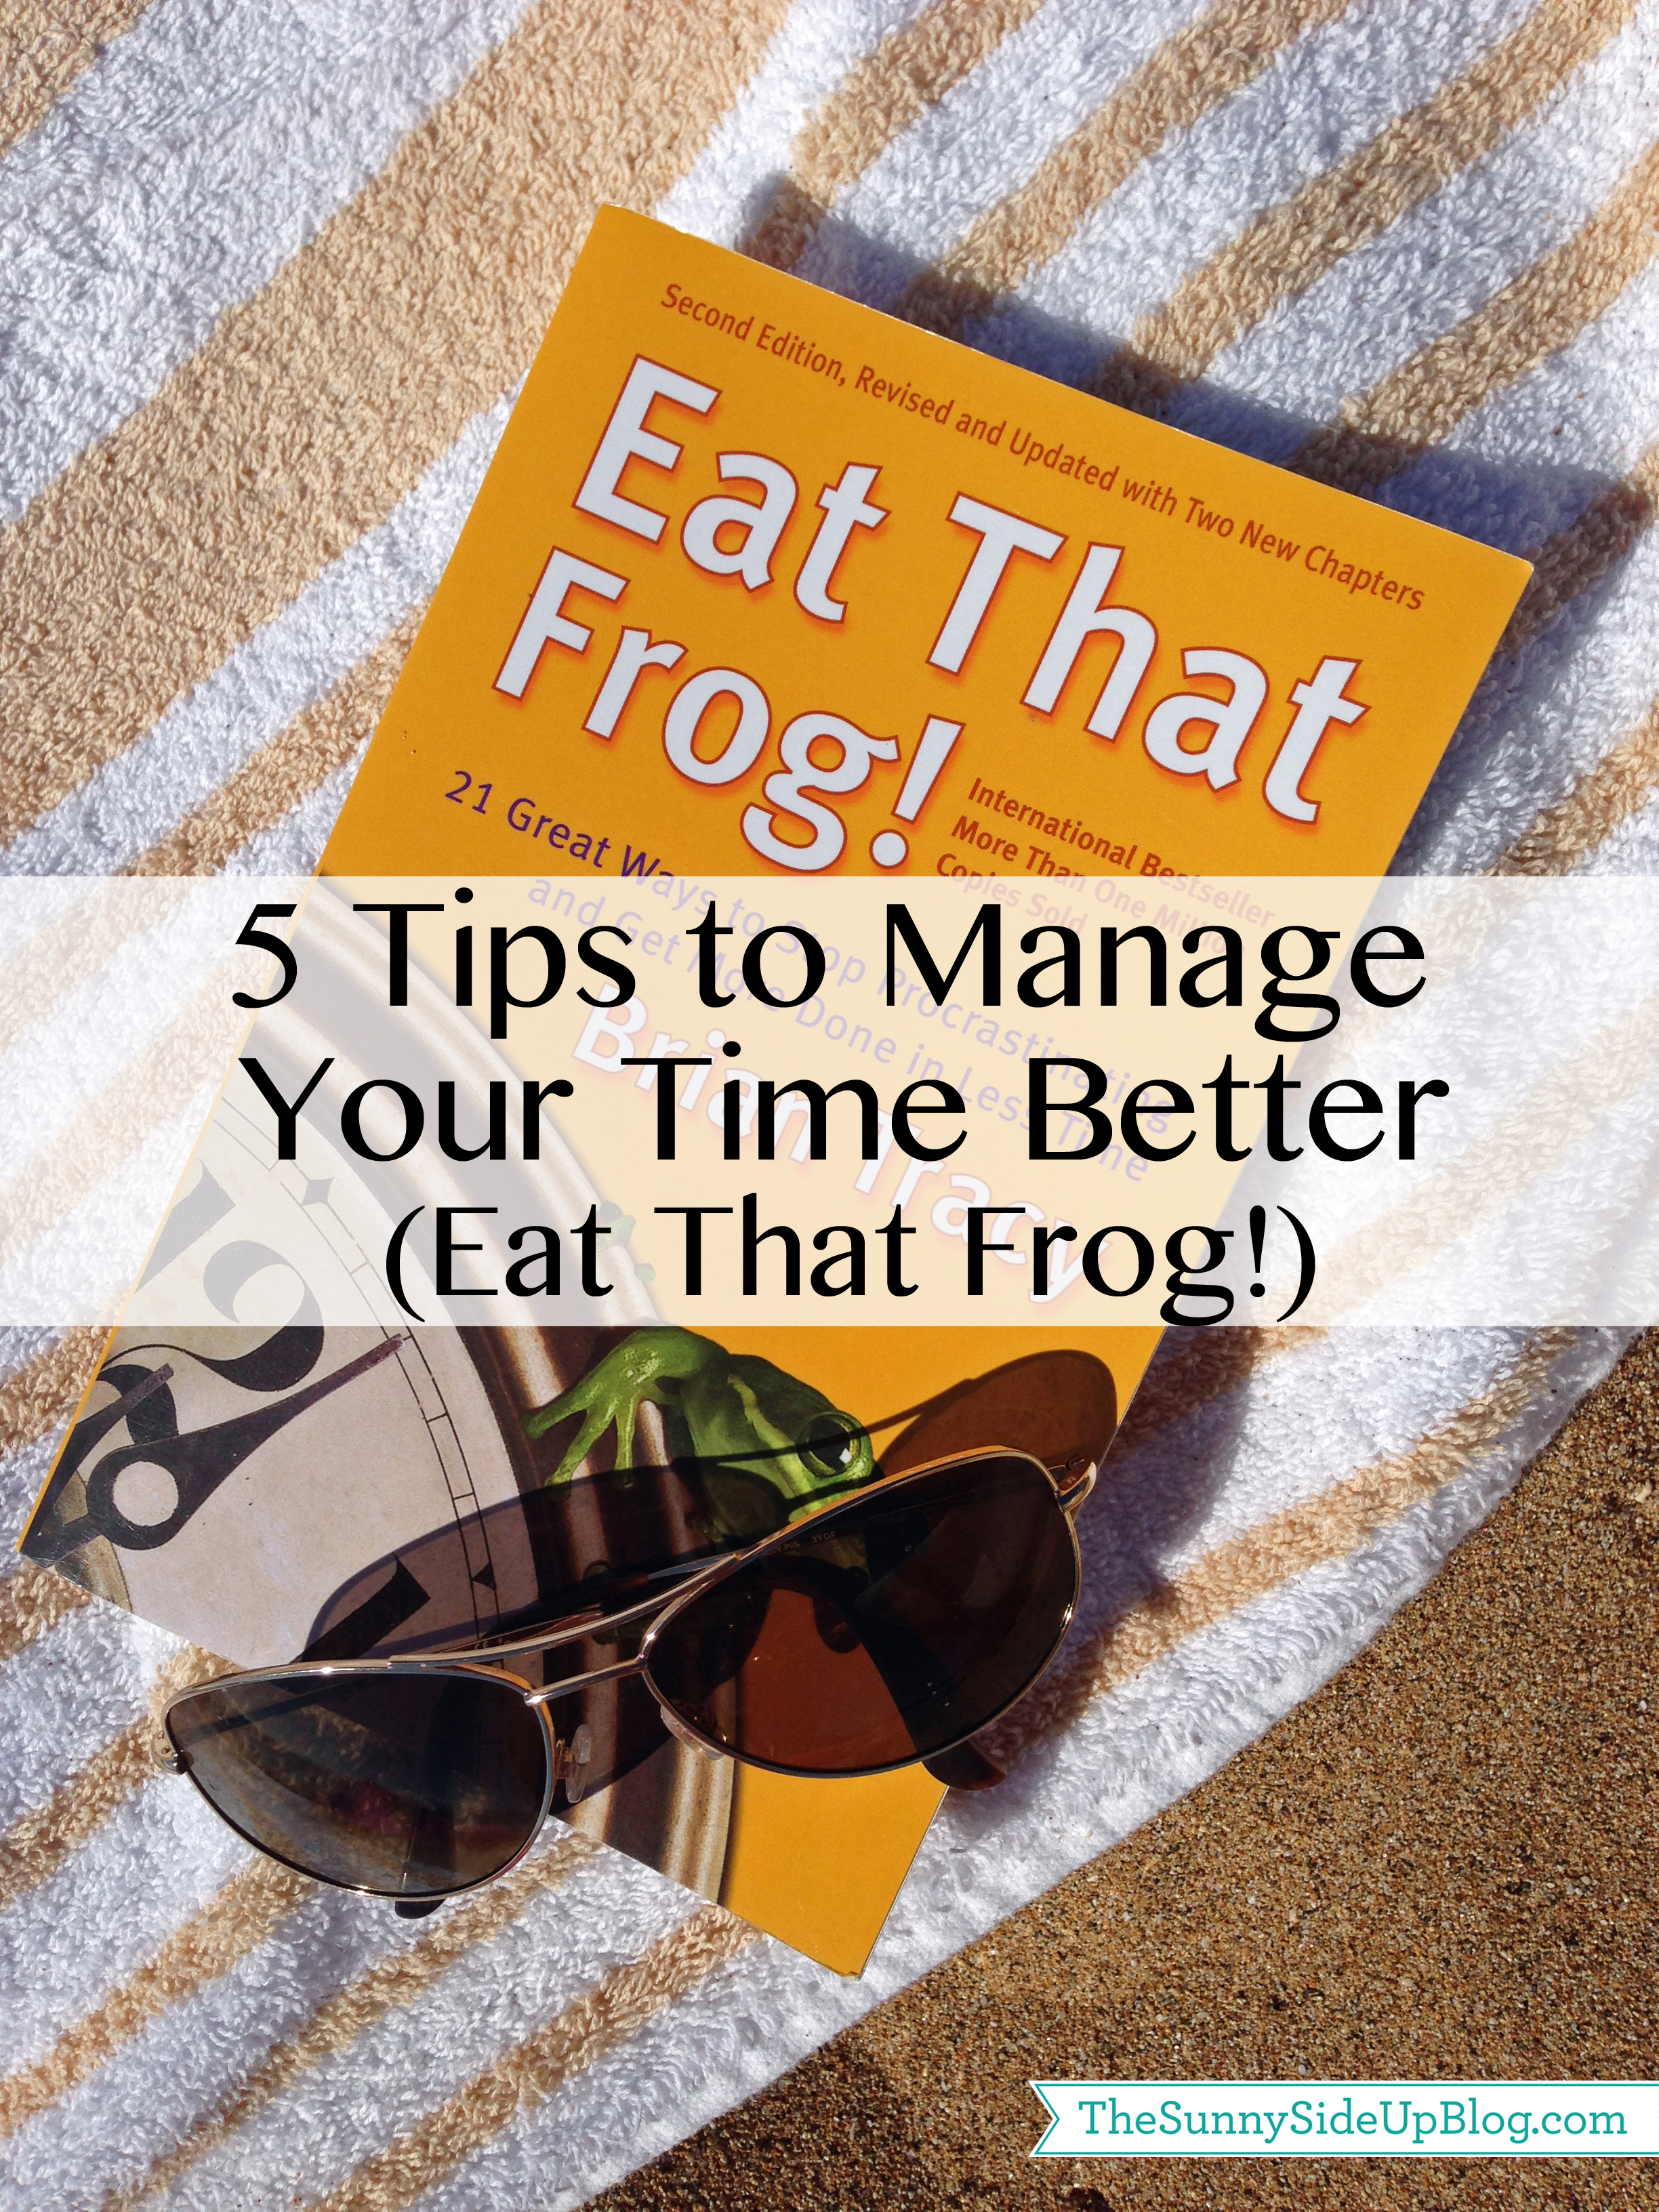 5 tips to manage your time better